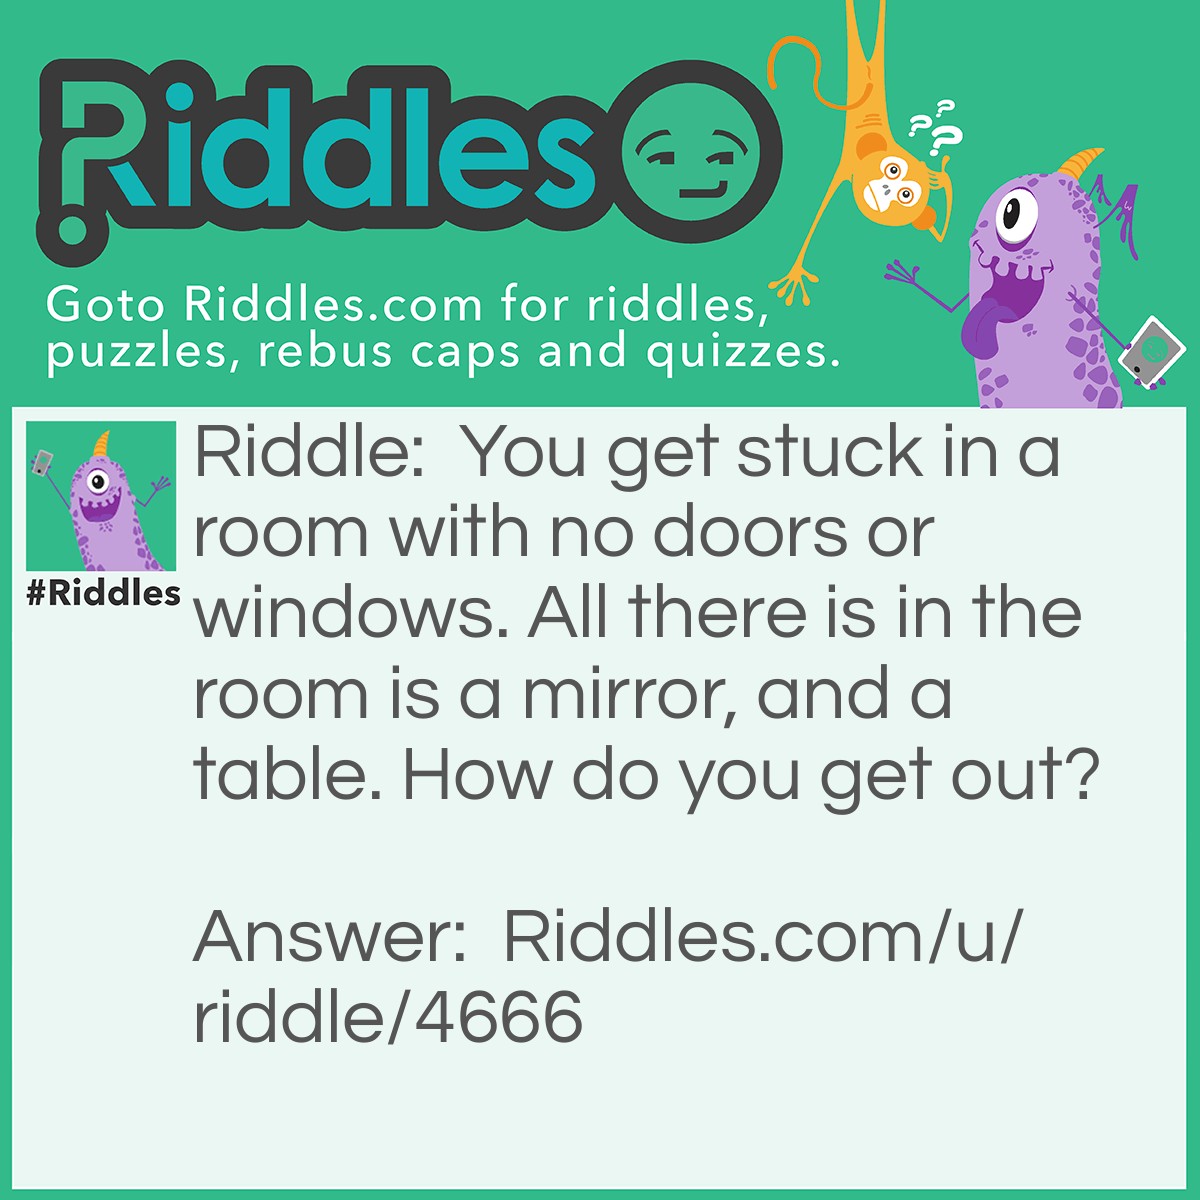 Riddle: You get stuck in a room with no doors or windows. All there is in the room is a mirror, and a table. How do you get out? Answer: You take the mirror and see what you SAW, you take a SAW and cut the table in half. Two halves make a whole (hole) you put a hole in the wall and get out!